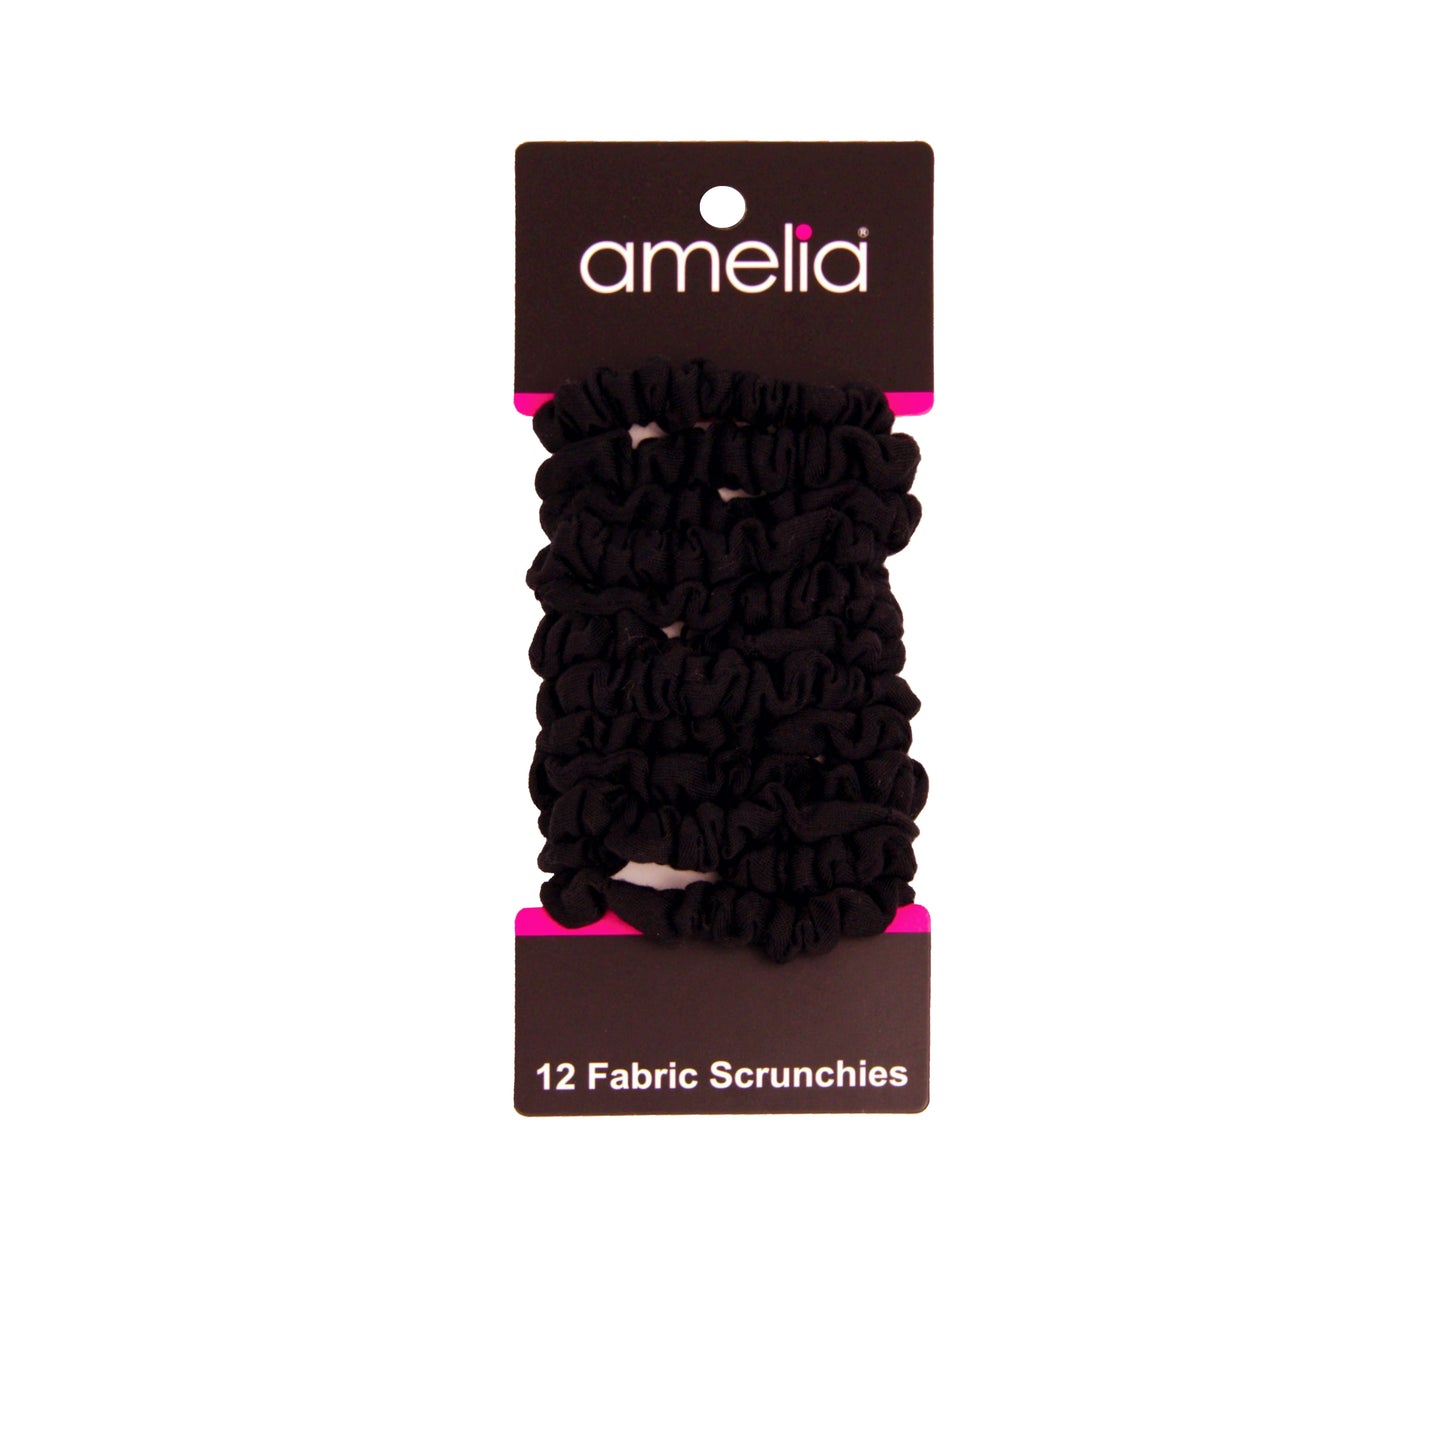 Amelia Beauty, Black Jersey Scrunchies, 2.25in Diameter, Gentle on Hair, Strong Hold, No Snag, No Dents or Creases. 12 Pack